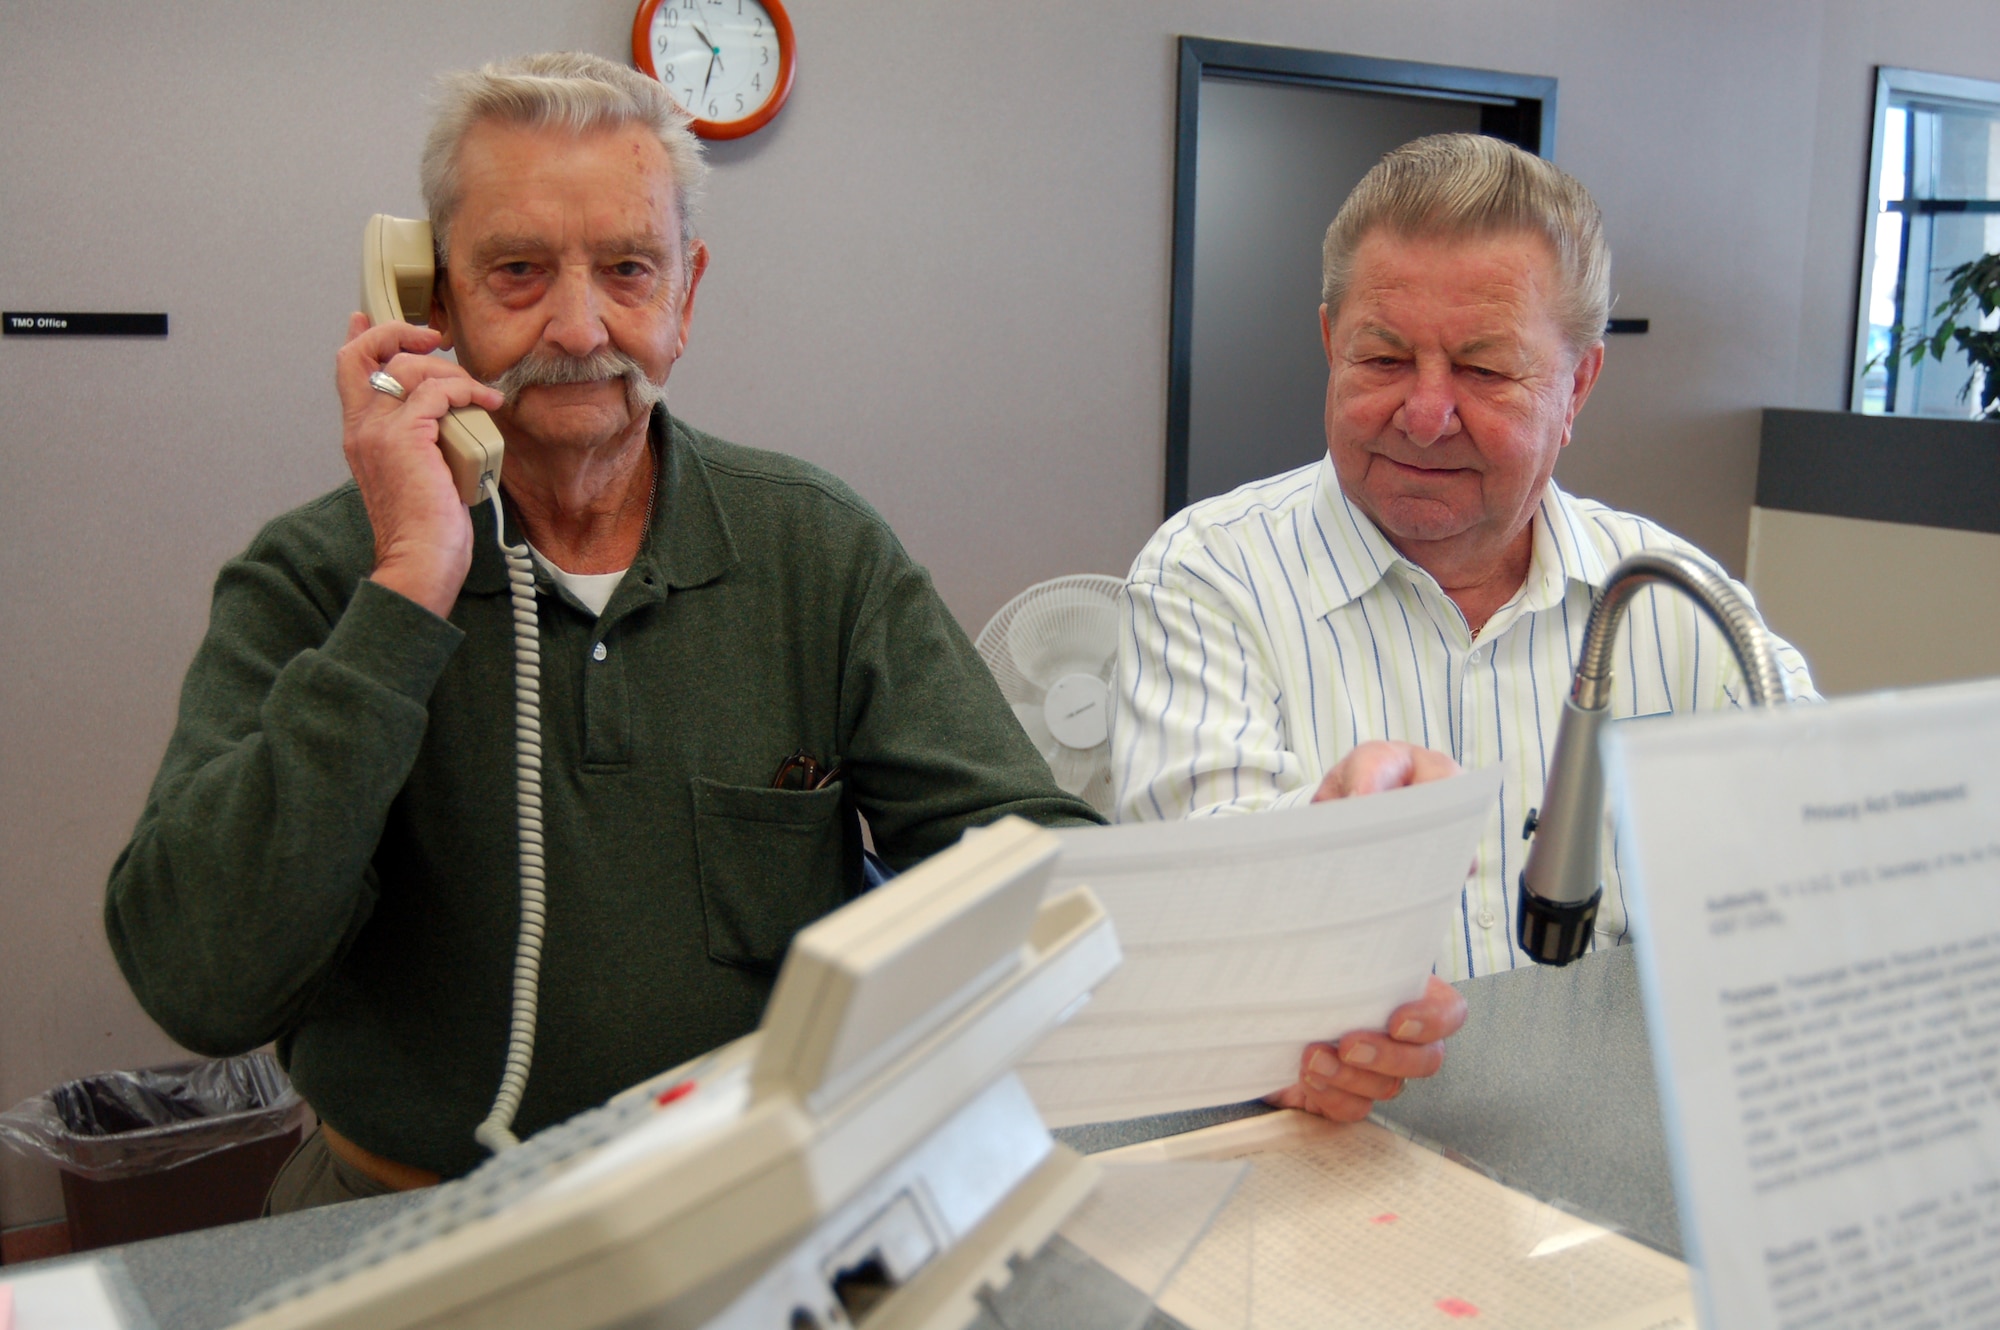 Richard Muckey (left) and Joe Ostruska, volunteers and retired Air Force sergeants, help people make travel arrangements at the Air Terminal’s Passenger Service Center. Mr. Muckey has been a volunteer at the PSC for more than 15 years, and Mr. Ostruska has been a volunteer for 11 years. (U.S. Air Force photo/Staff Sgt. James Wilkinson)